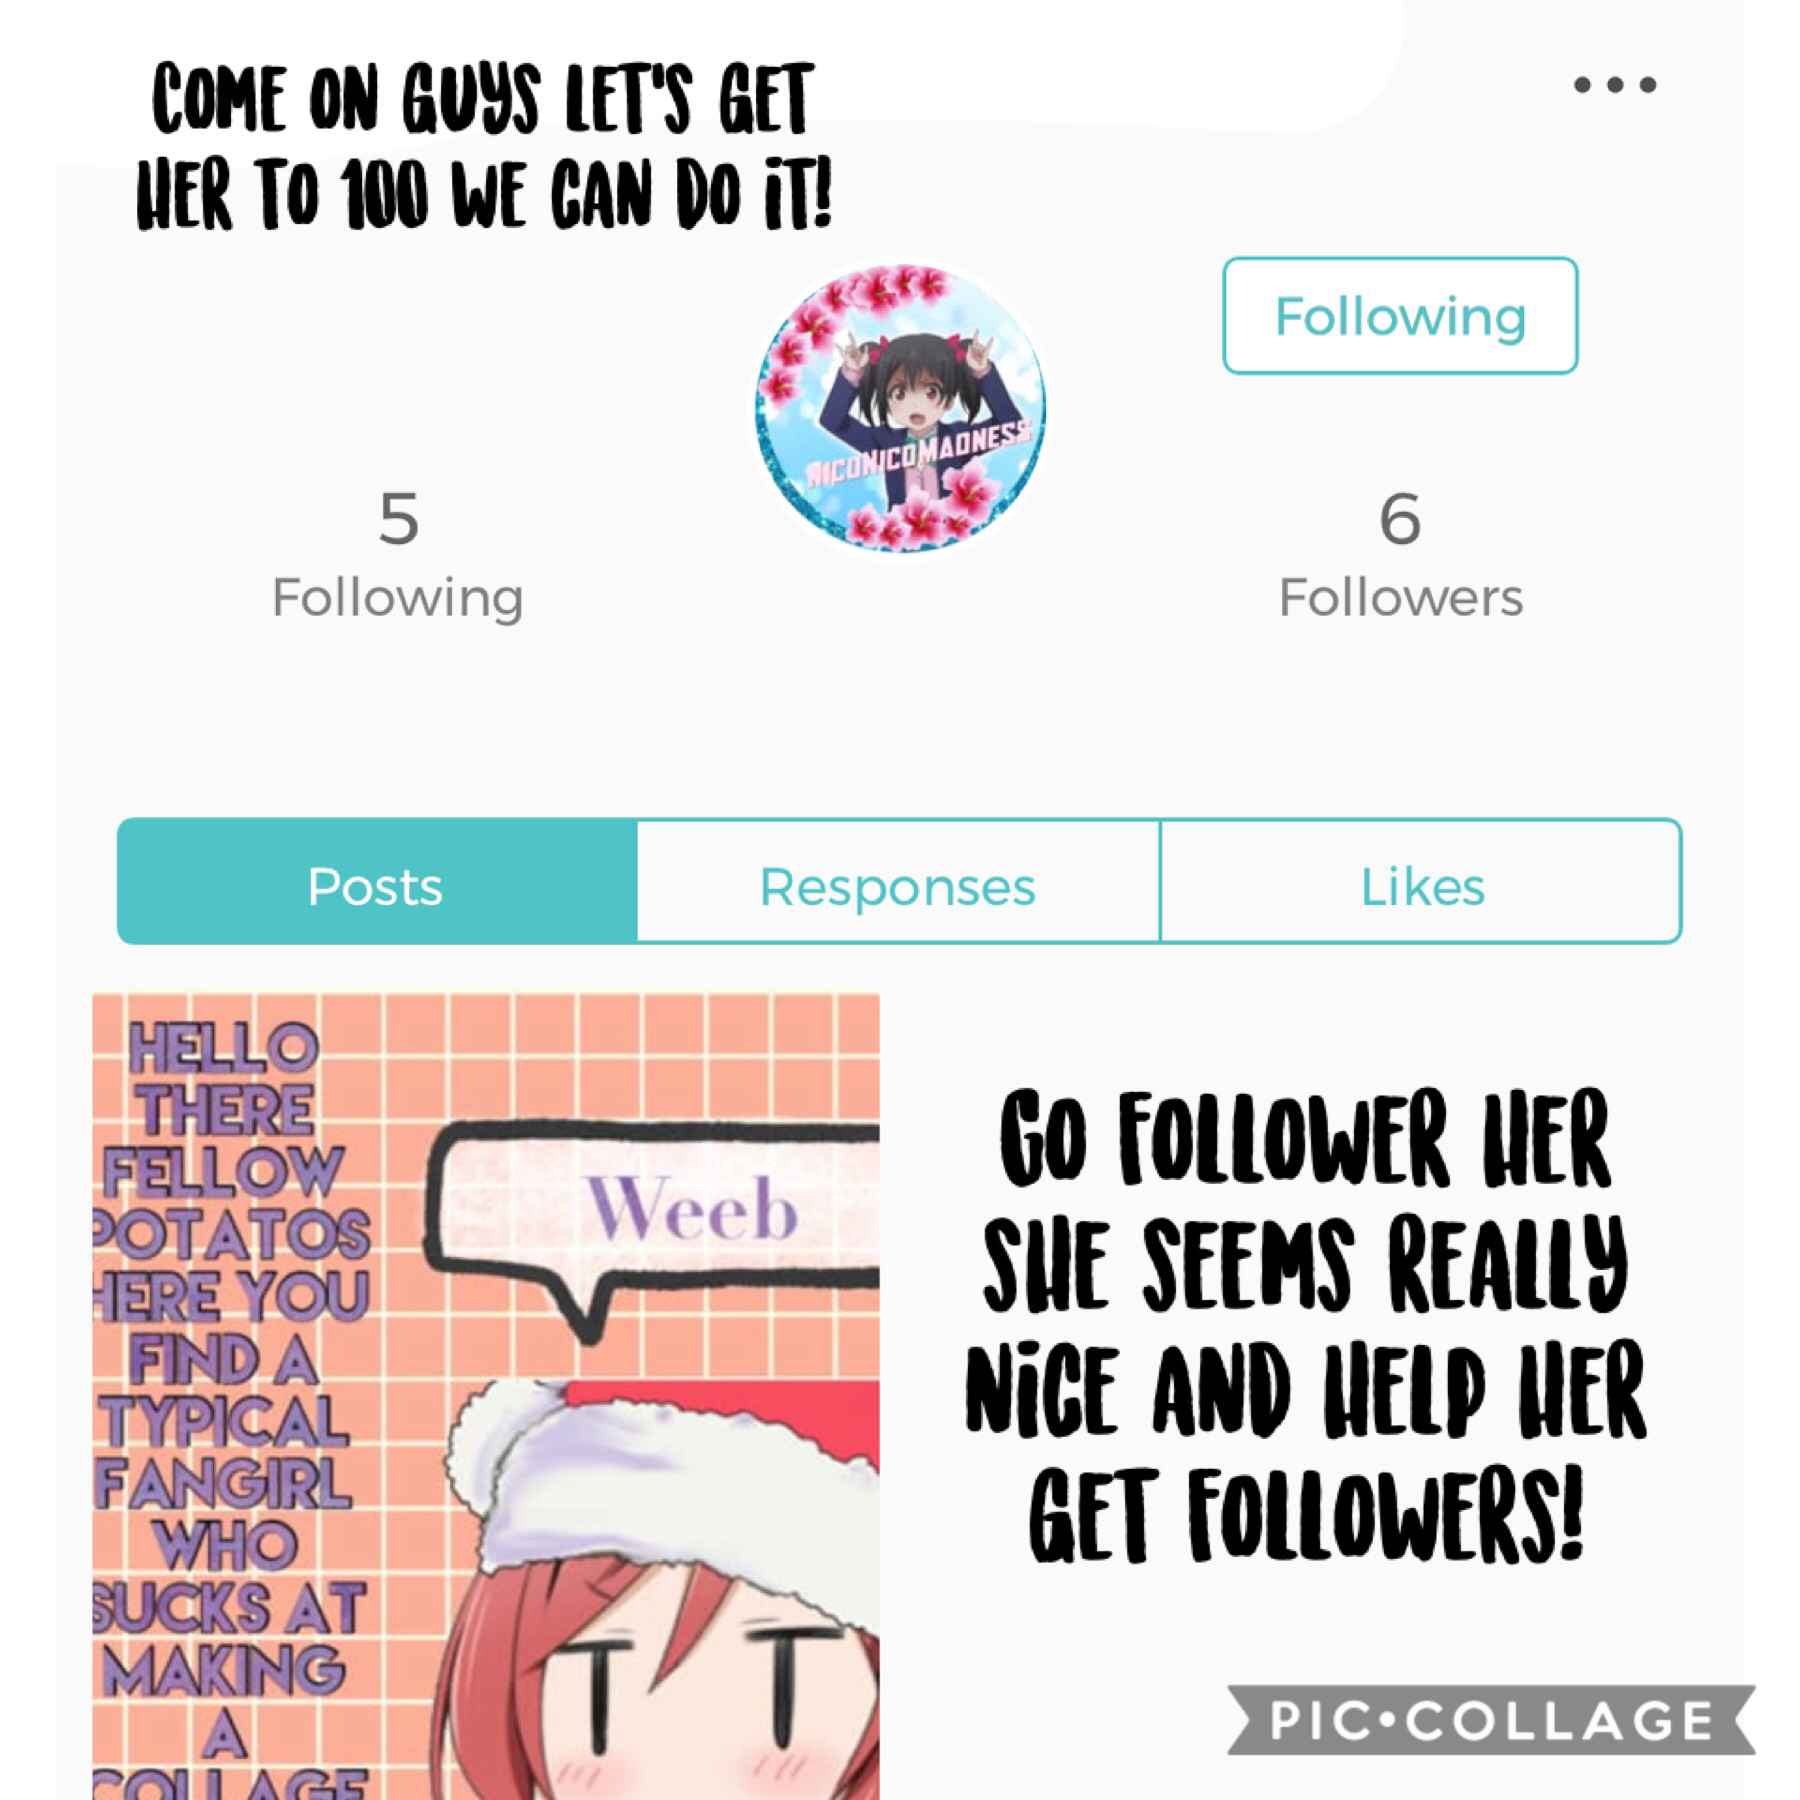 Tap
Follower her and help her get followers! 